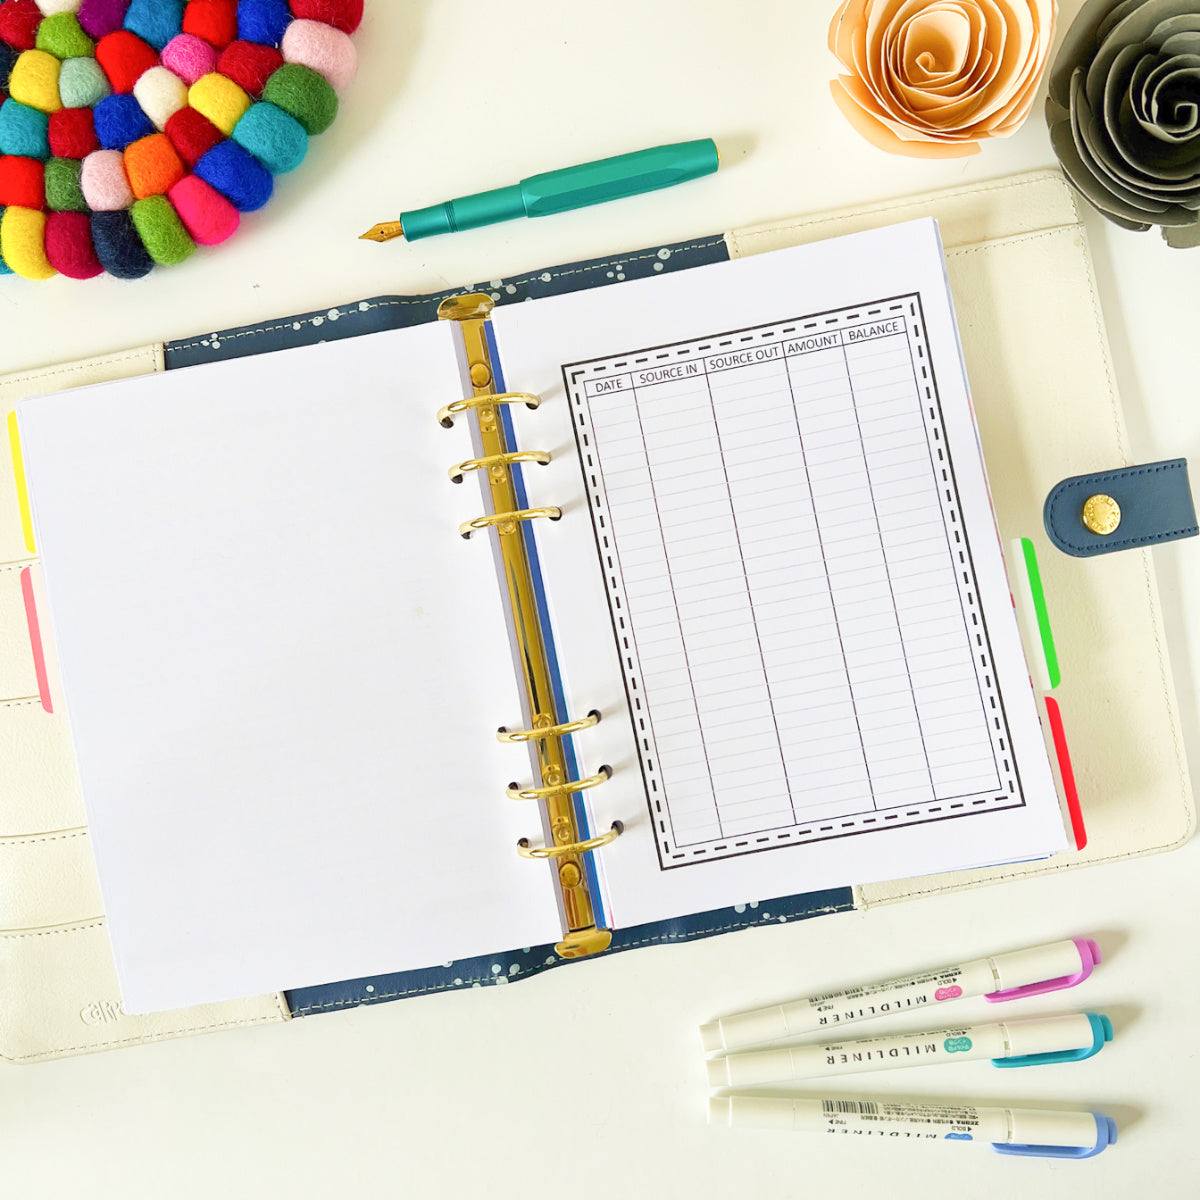 An open planner with a blank Spending Tracker Page inside sits on a white surface. Nearby are colorful pens, a pen, a gray paper flower, and a colorful pom-pom coaster. The planner is surrounded by bright and cheerful stationery items, perfect for detailed budget tracking.